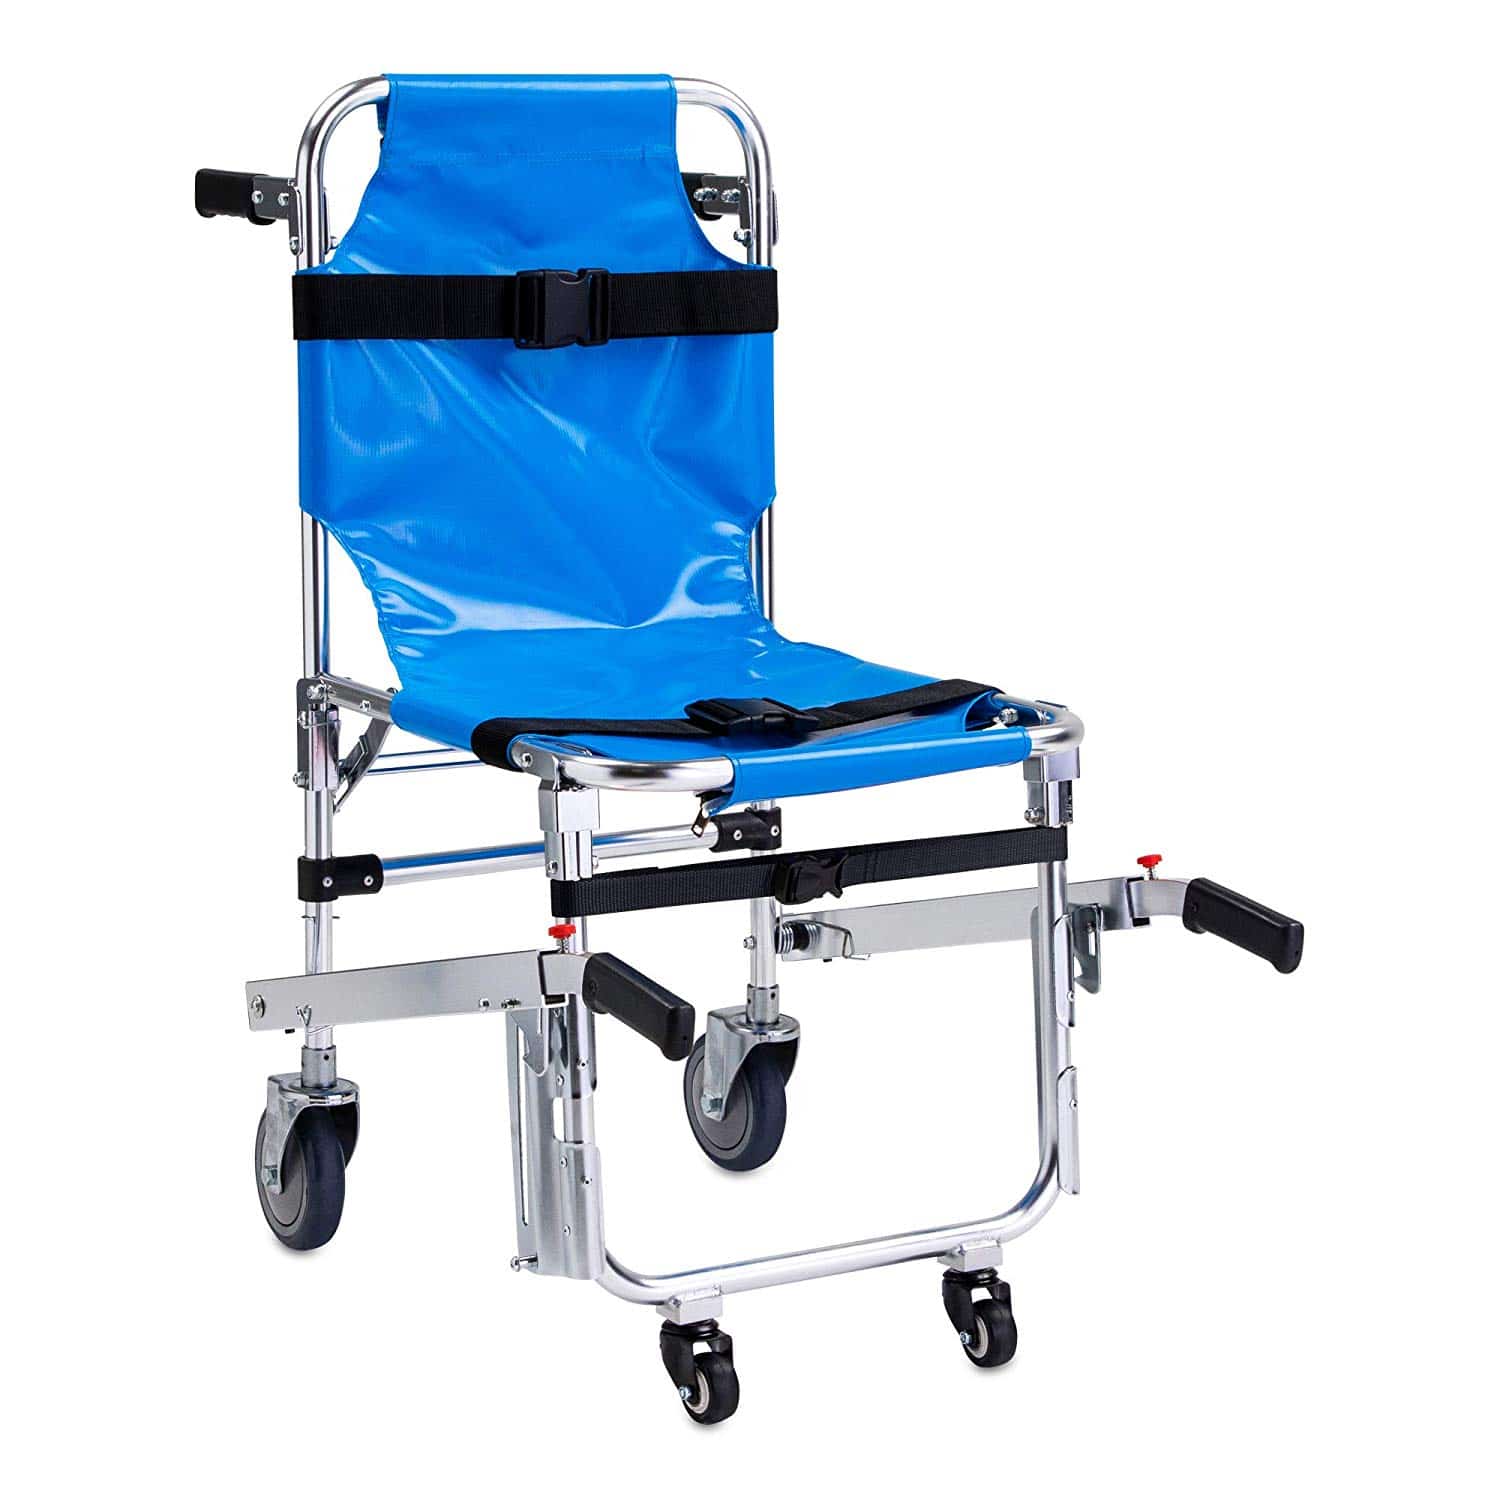 LINE2design Stair Chair 70010-BL EMS Emergency 4 Wheels Ambulance Firefighter Evacuation Medical Transport Chair with Patient Restraint Straps, 350 lbs Capacity, Blue 36″ x 21″ x 28″